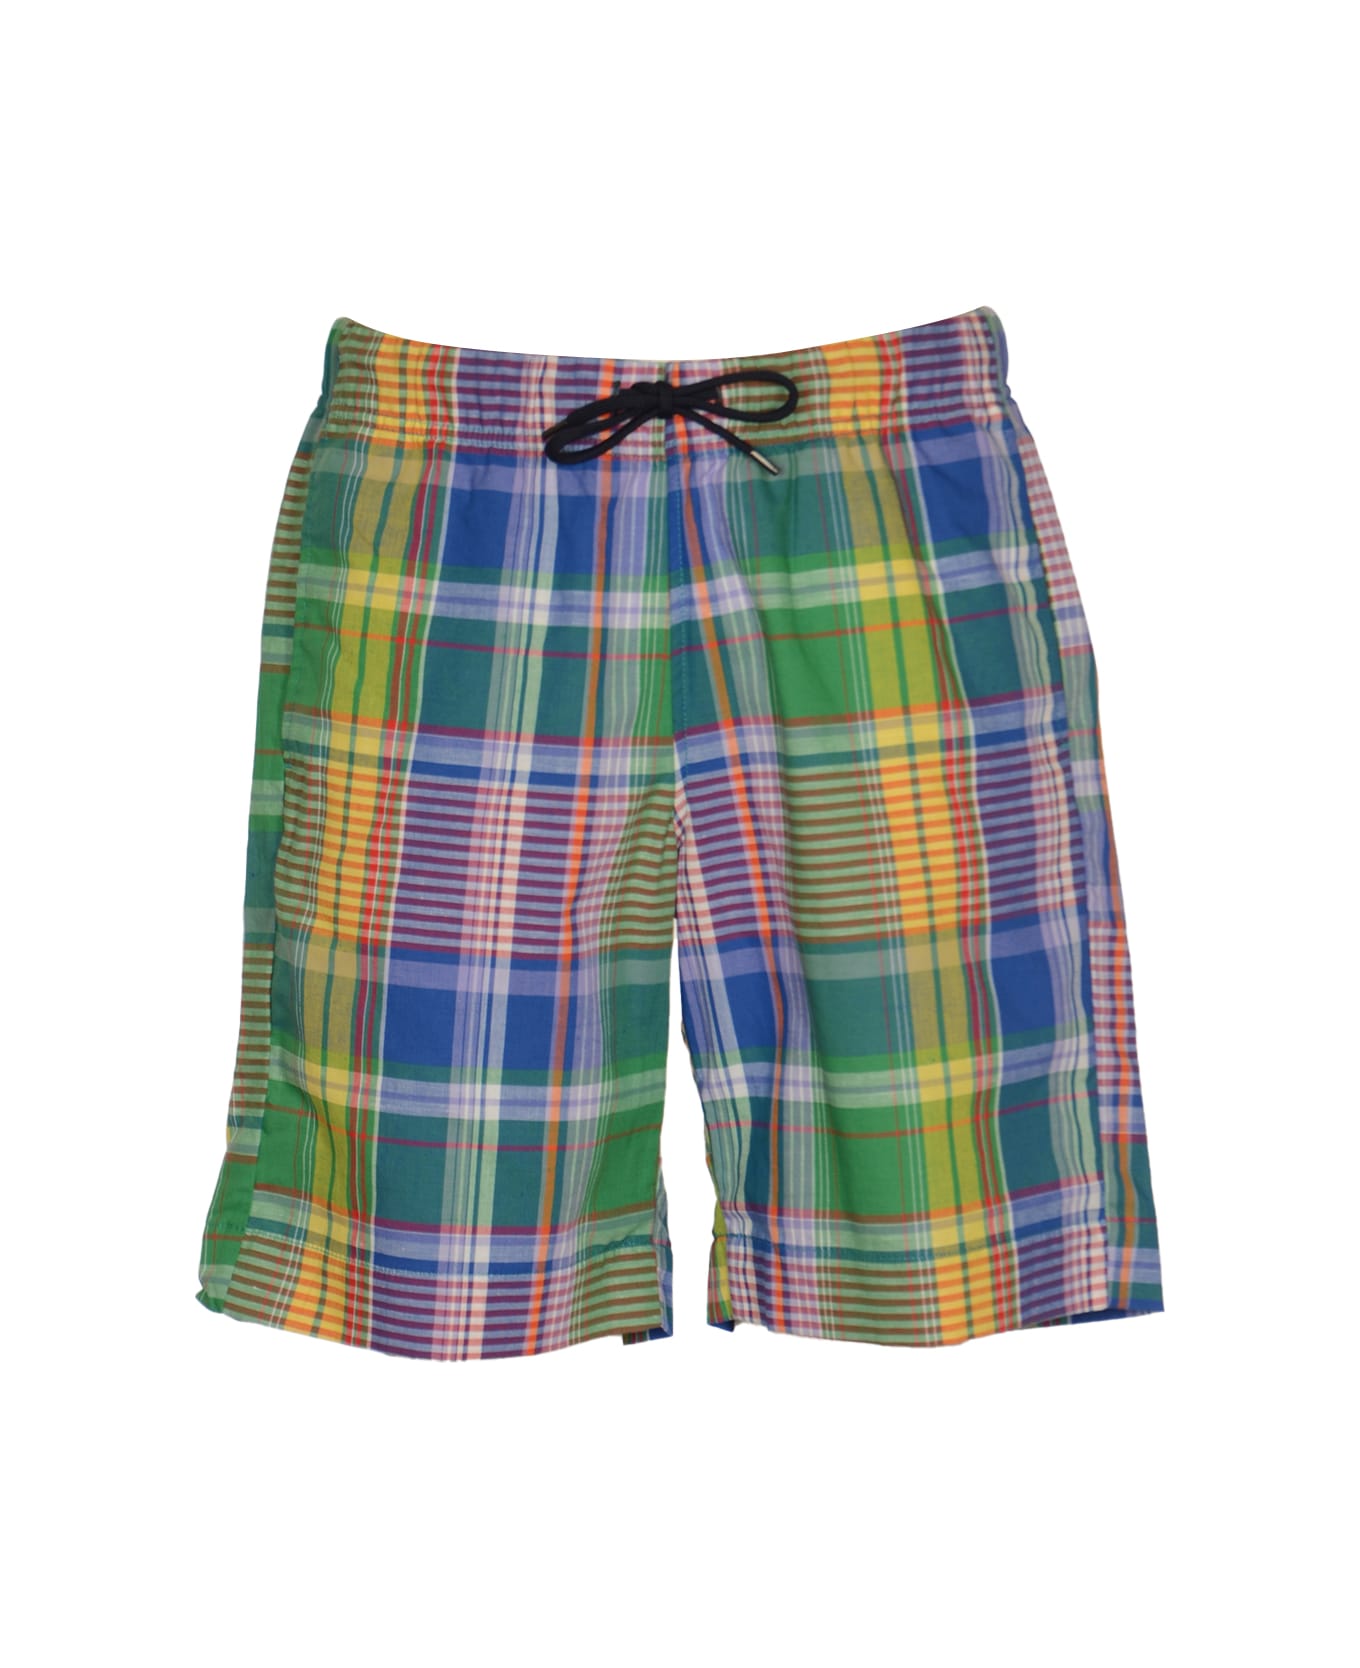 Paul Smith Drawstring Waist Check Patterned Shorts - Multicolor